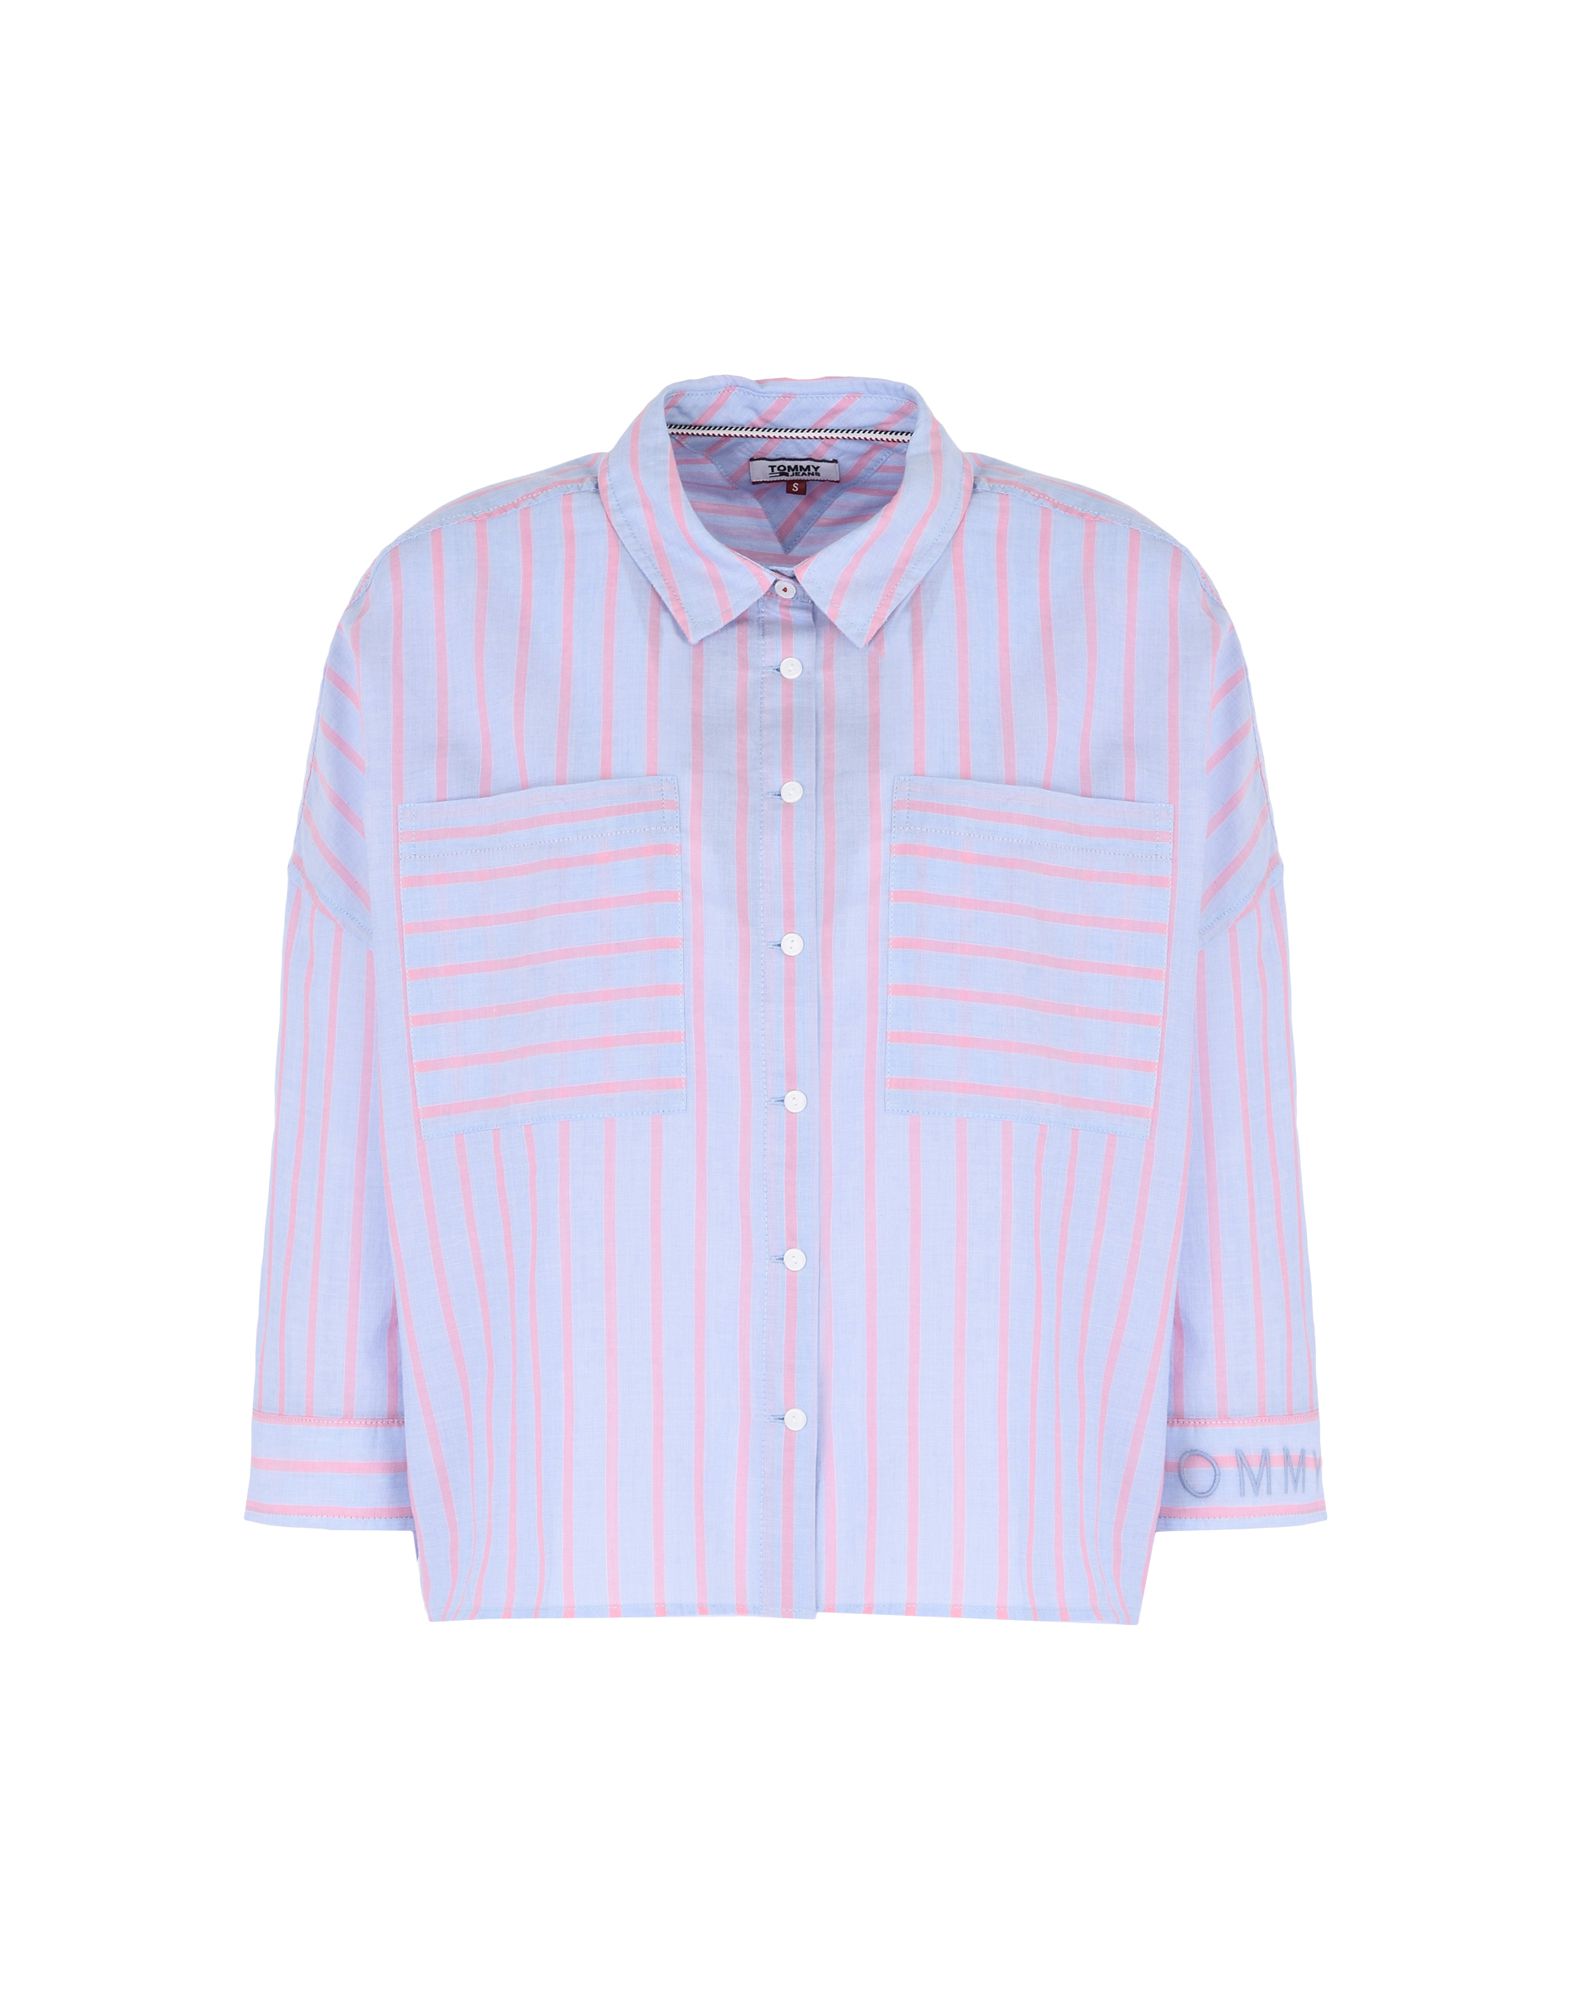 TOMMY JEANS Striped shirt,38717360GP 6